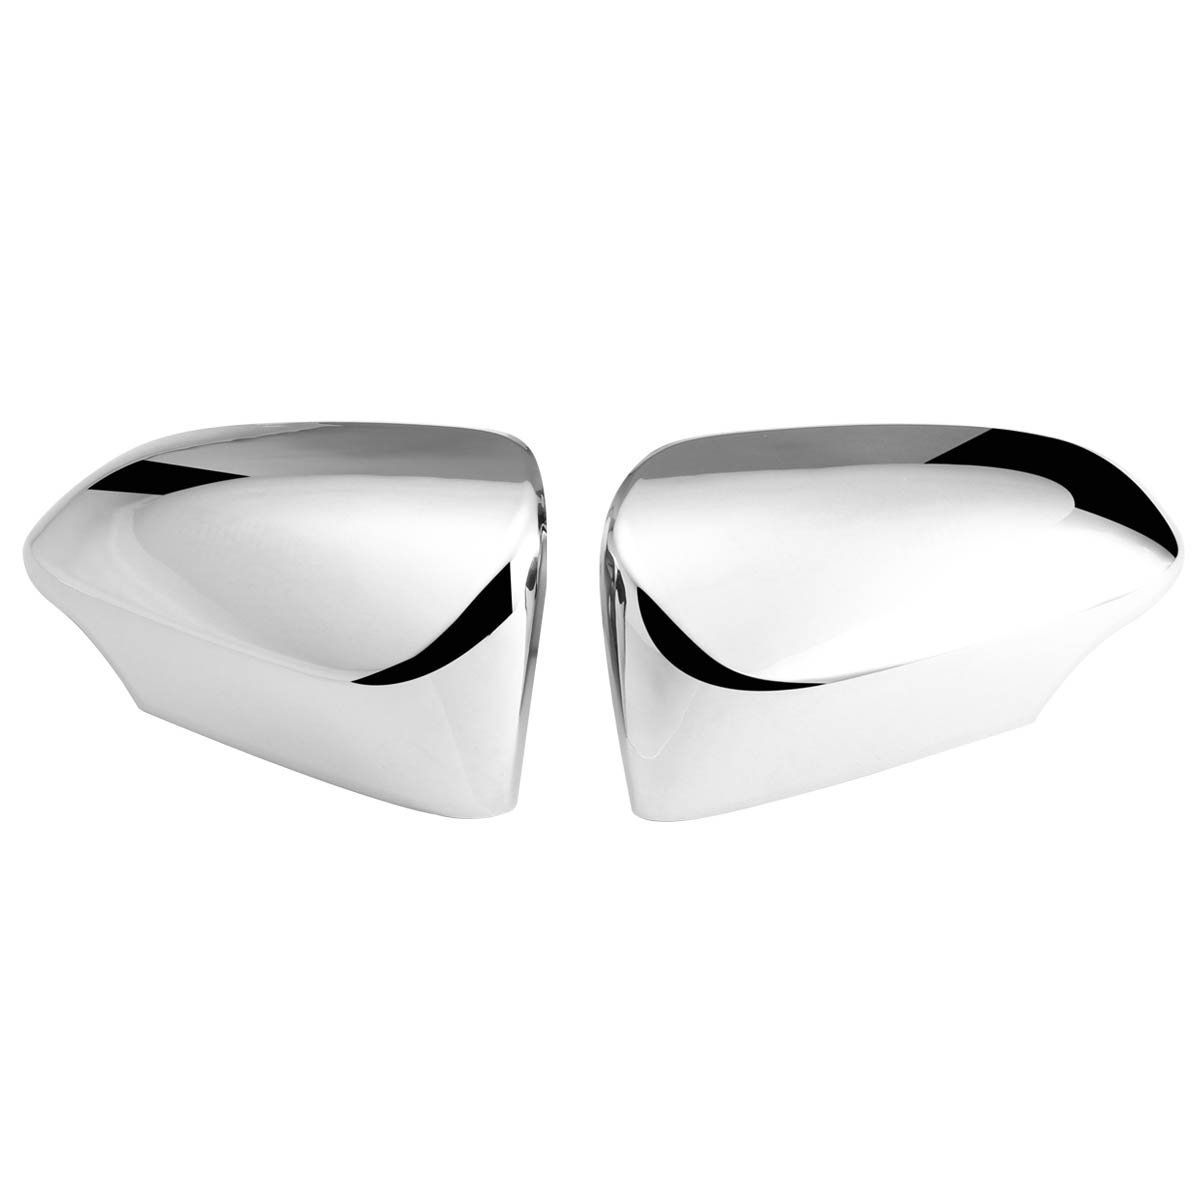 SIDE MIRROR COVERS FOR DATSUN GO (SET OF 2PCS)